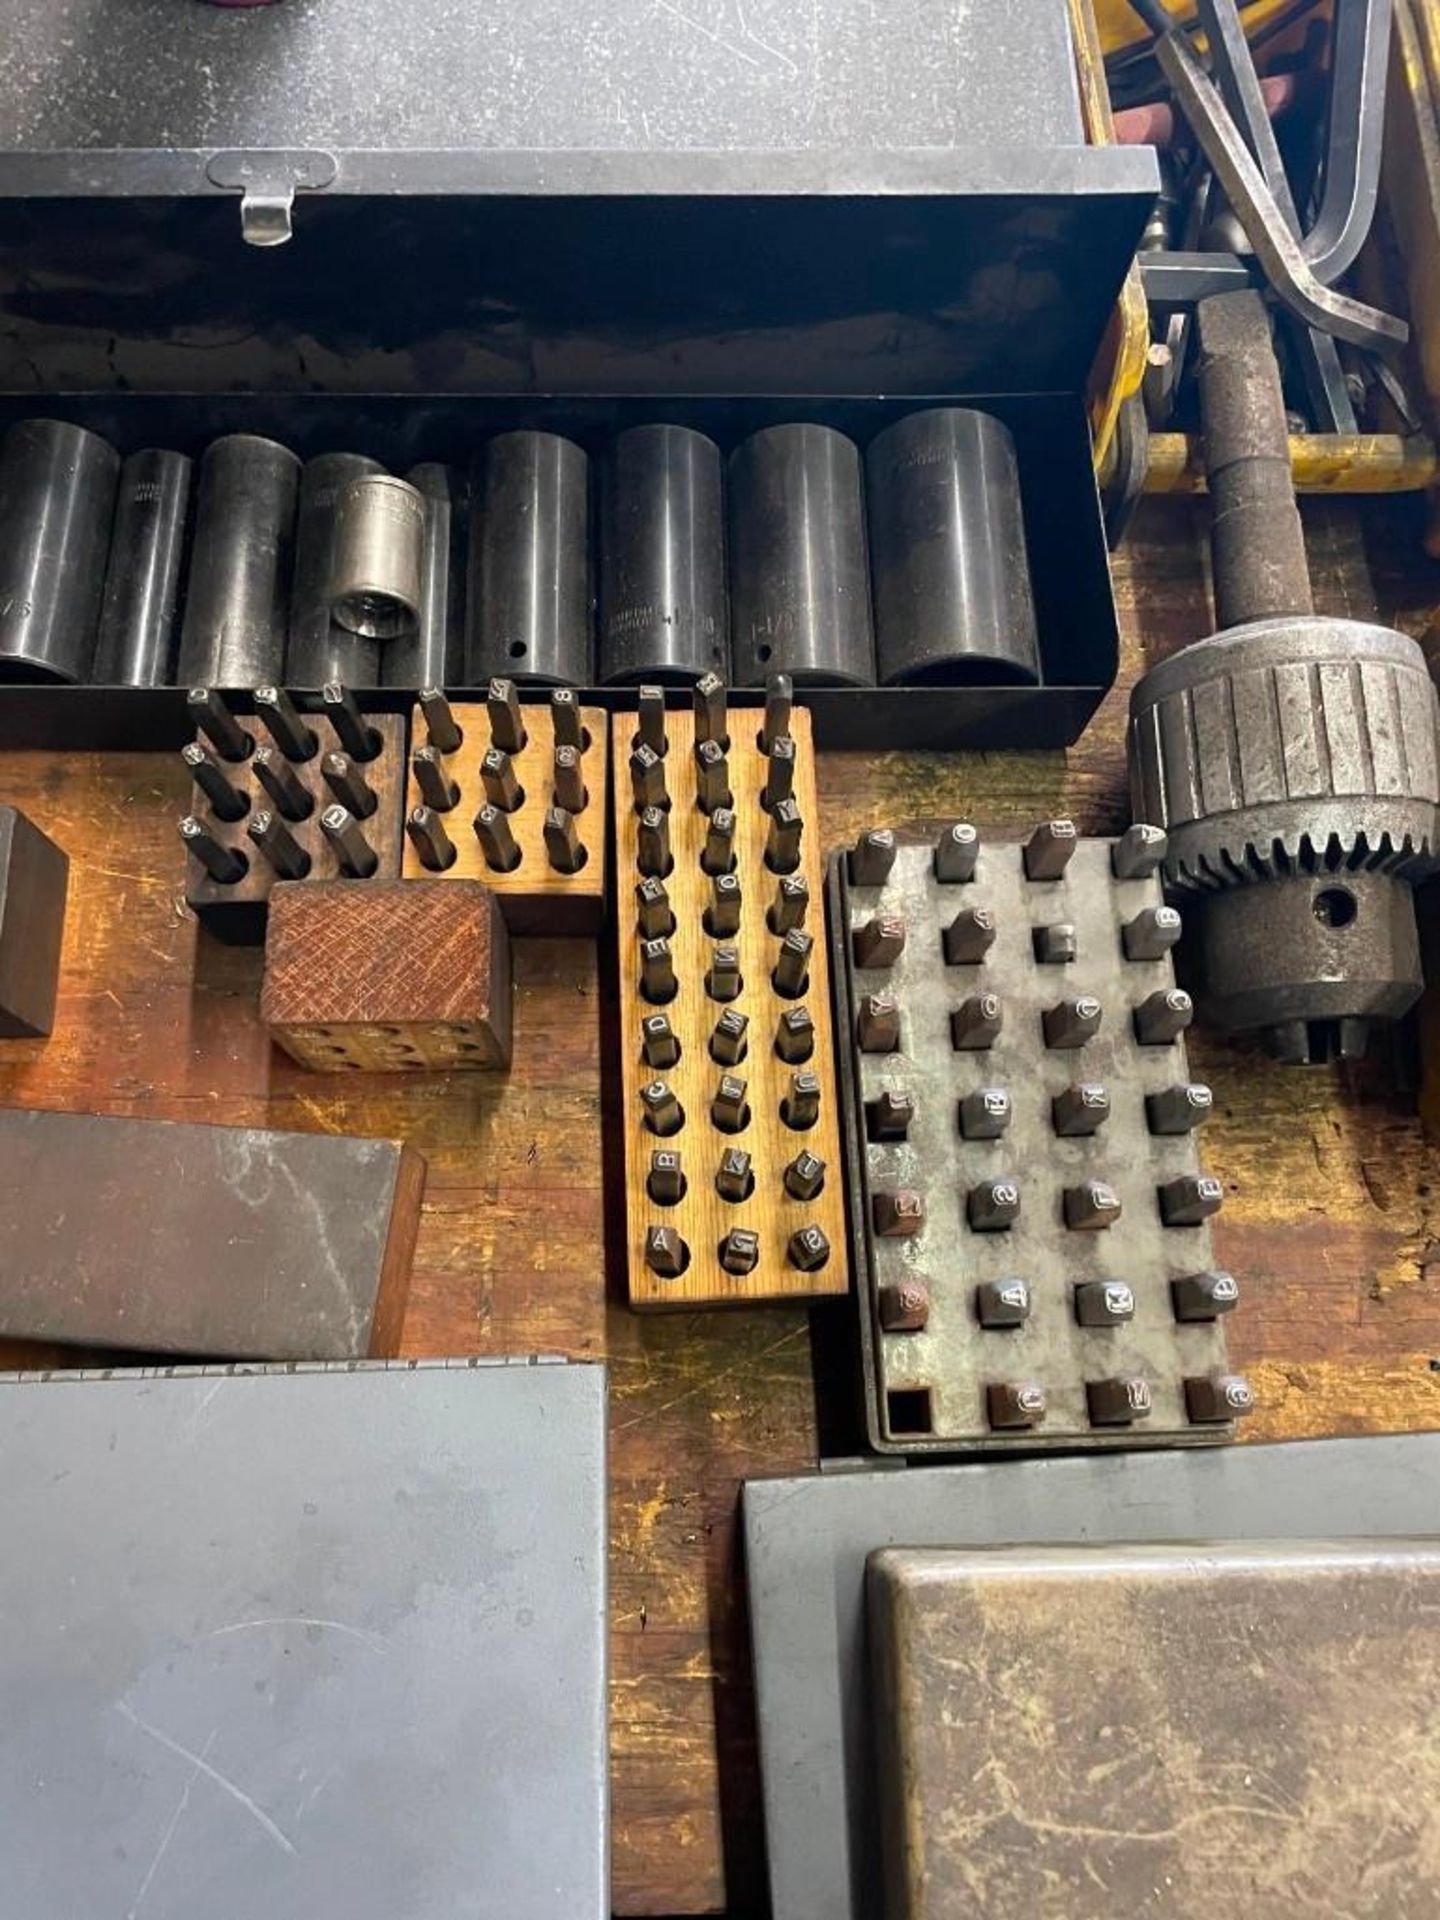 LARGE LOT OF DRILL BITS, REAMERS, IMPACT SOCKETS, MILLING AND LATHE TOOLING - Image 10 of 10